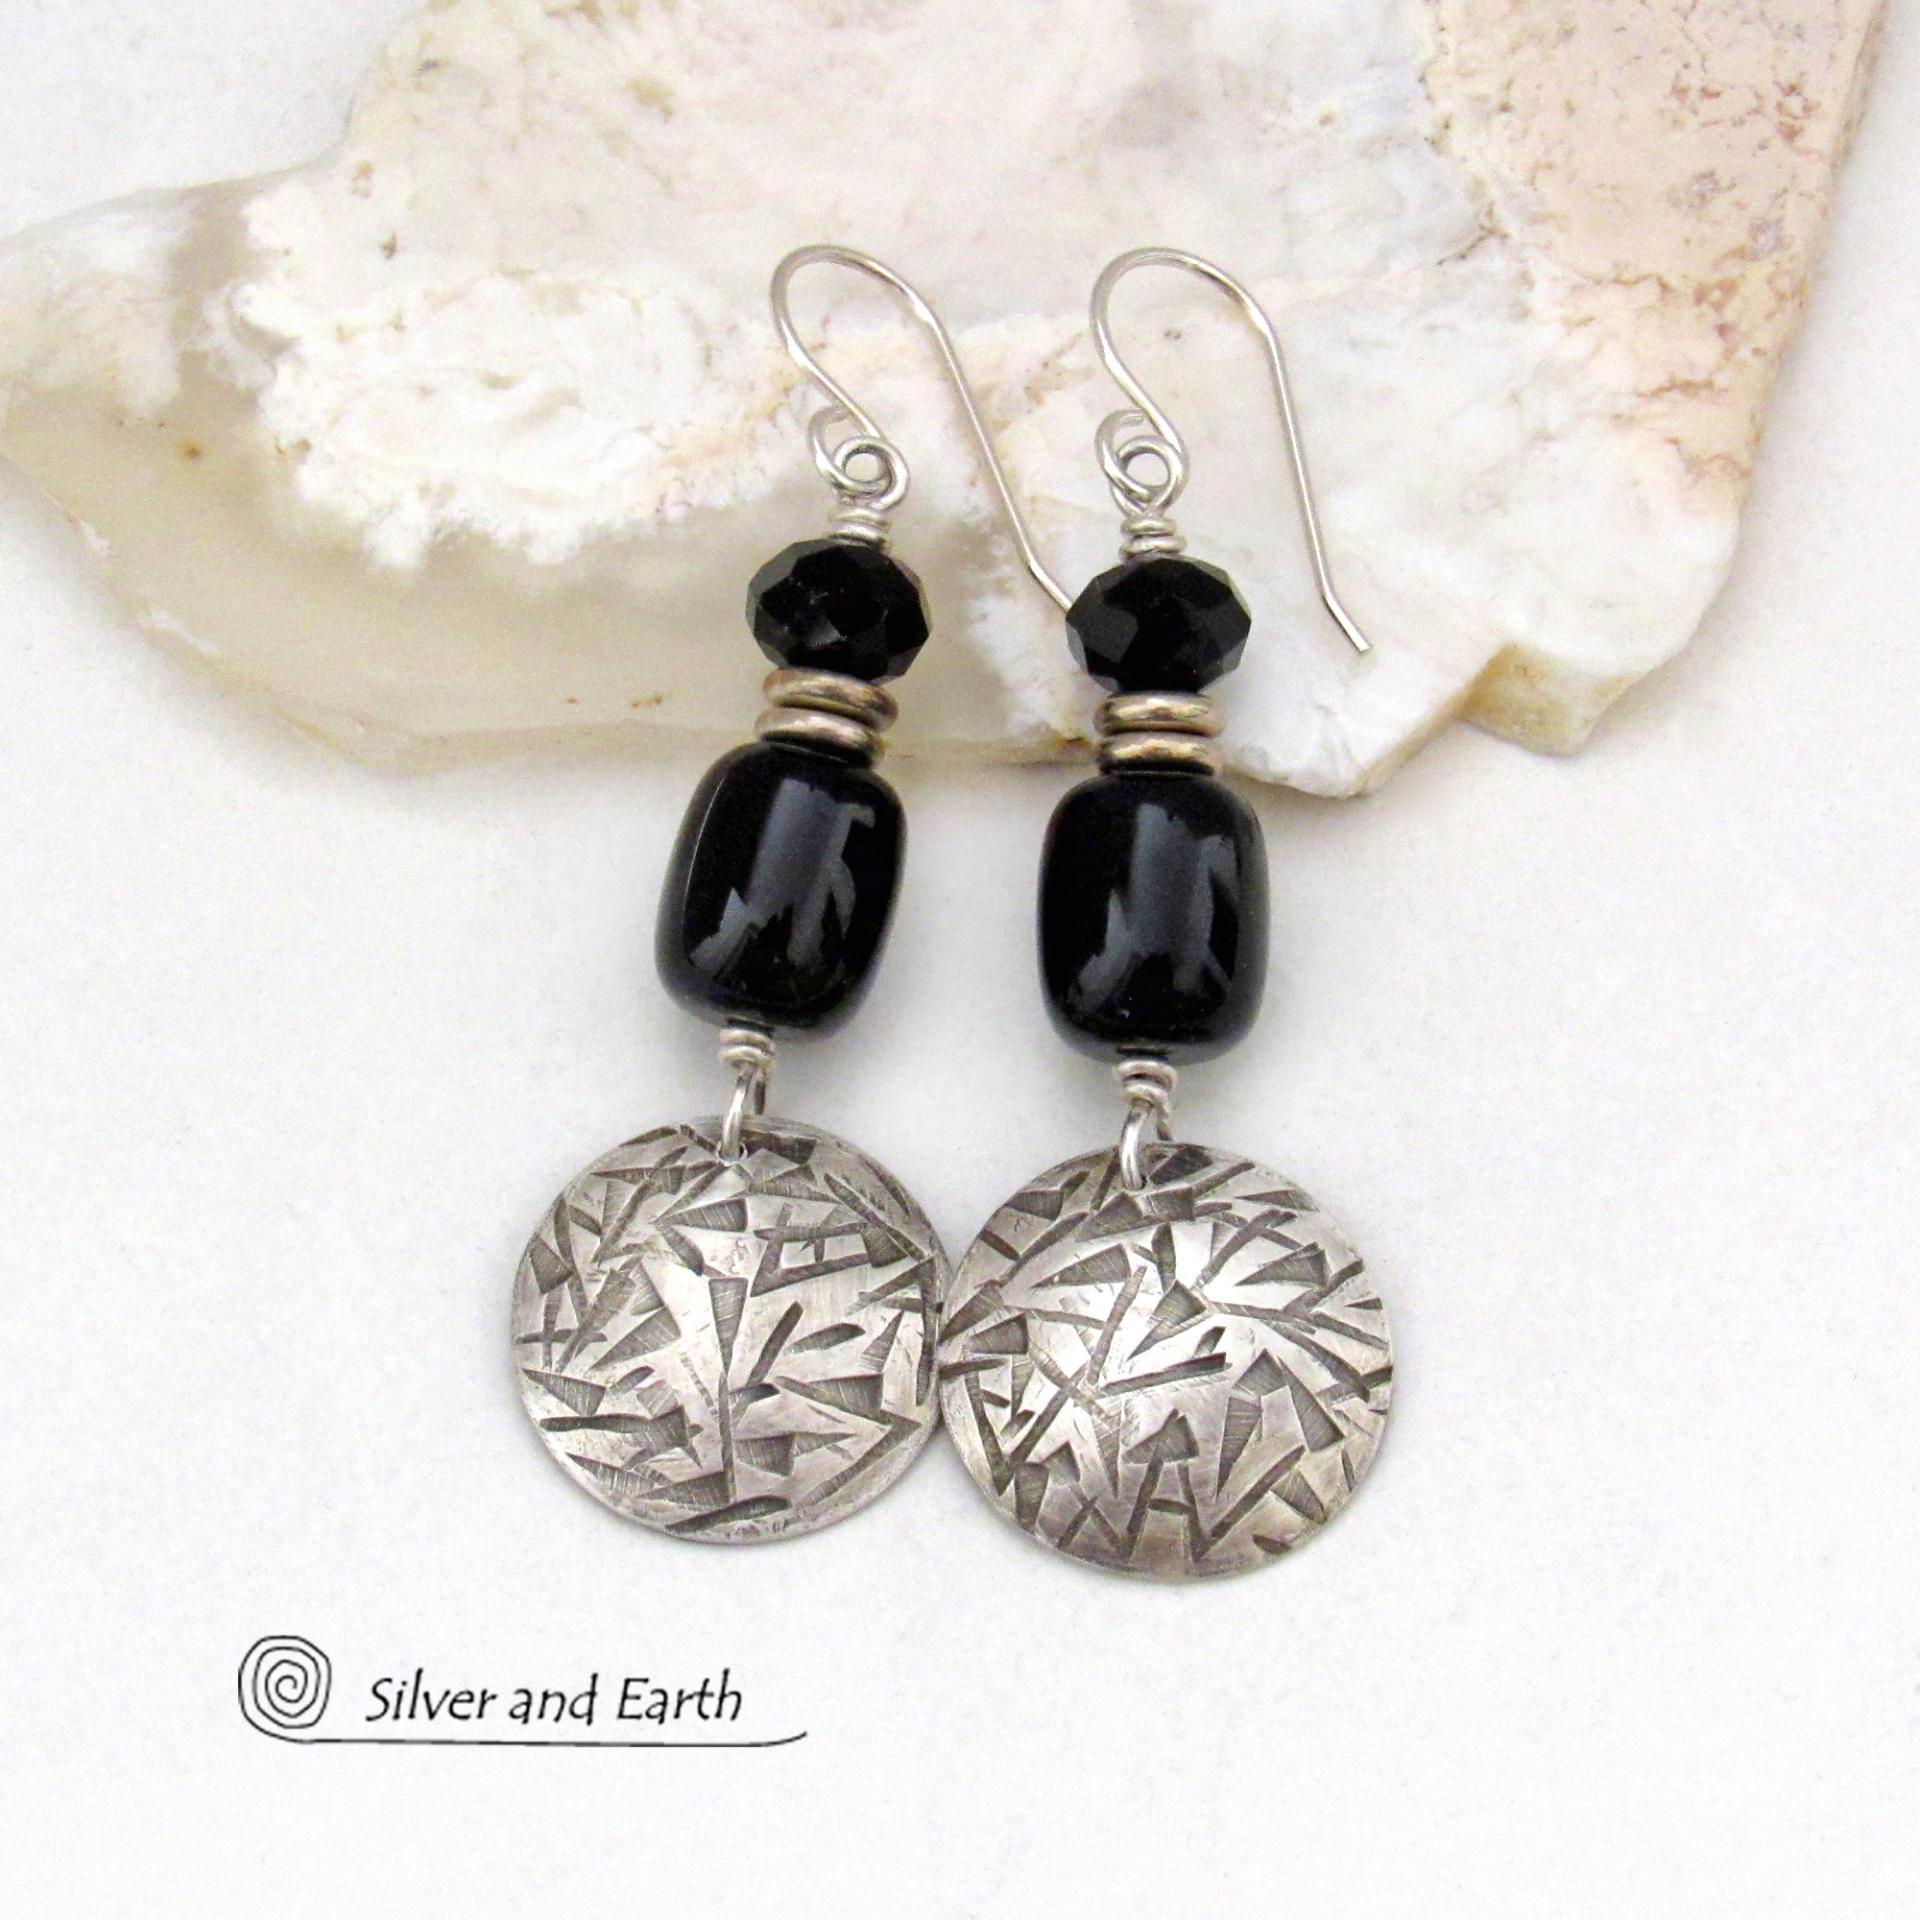 Hand Stamped Sterling Silver Earrings with Black Onyx Gemstones & Faceted Crystal Beads